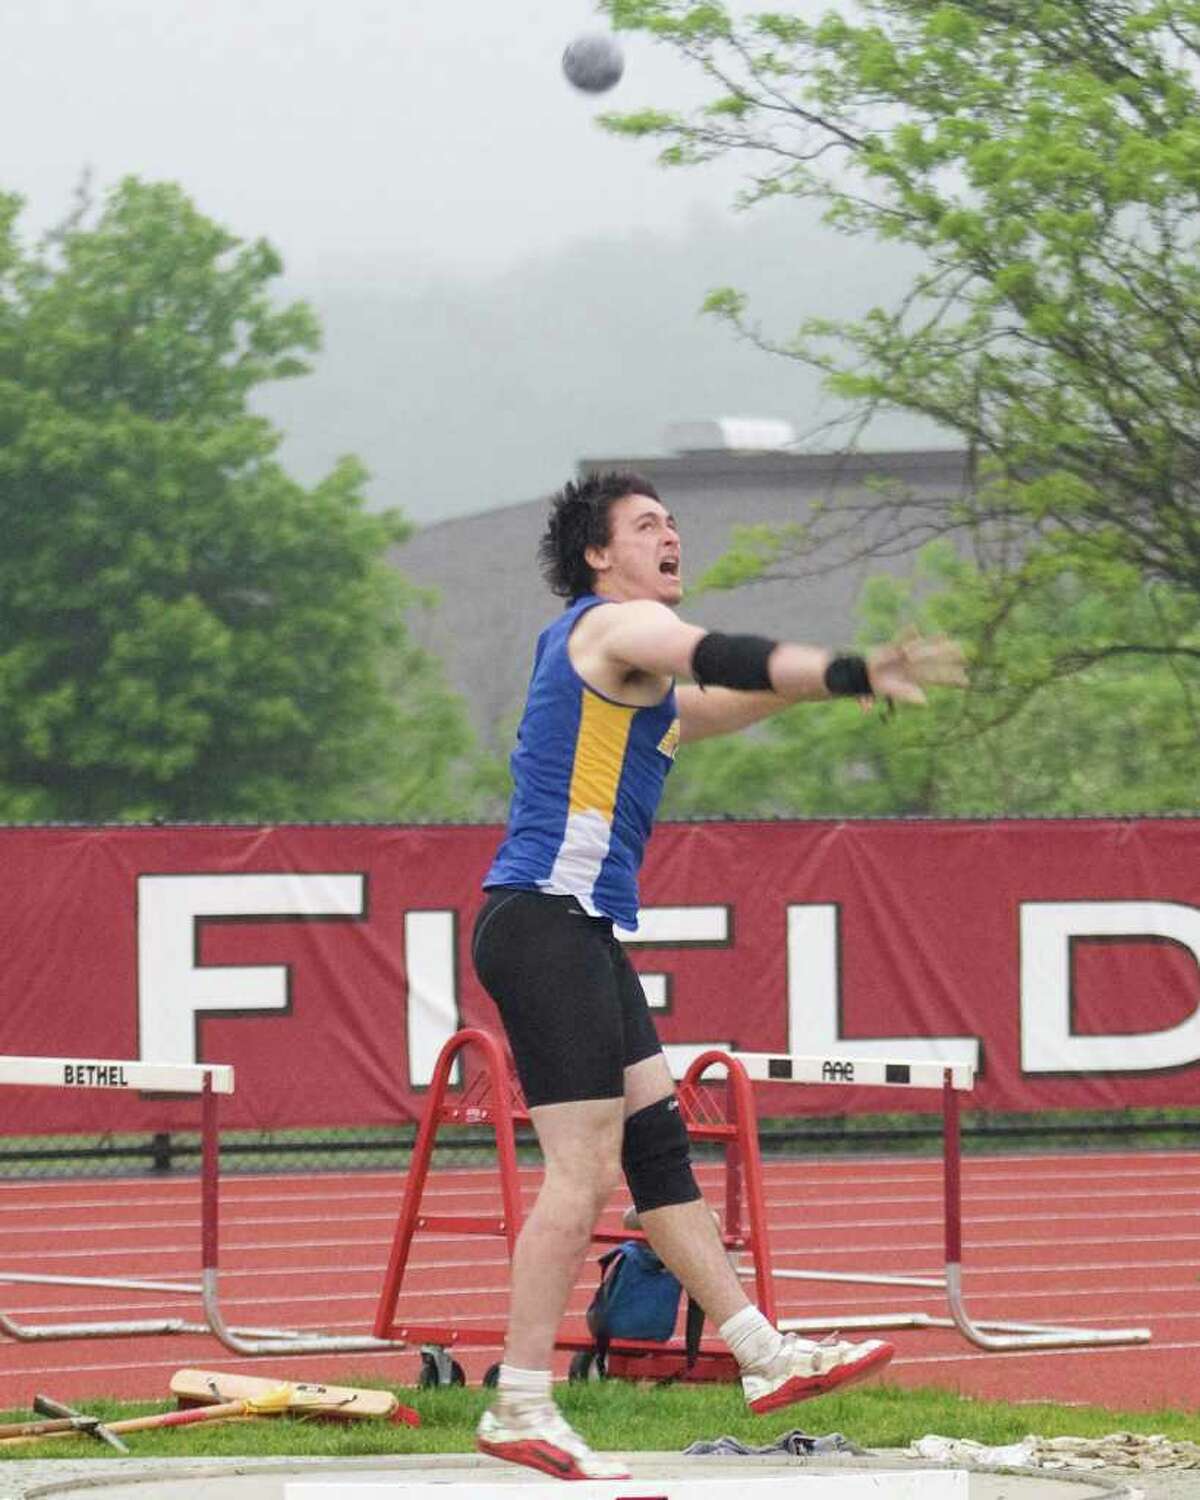 Newtown's John Wlasuk notched his third first place finish by winning the shot put at the SWC Track and Field Championships Monday at Bethel High School. Wlasuk also won the discus and javelin.